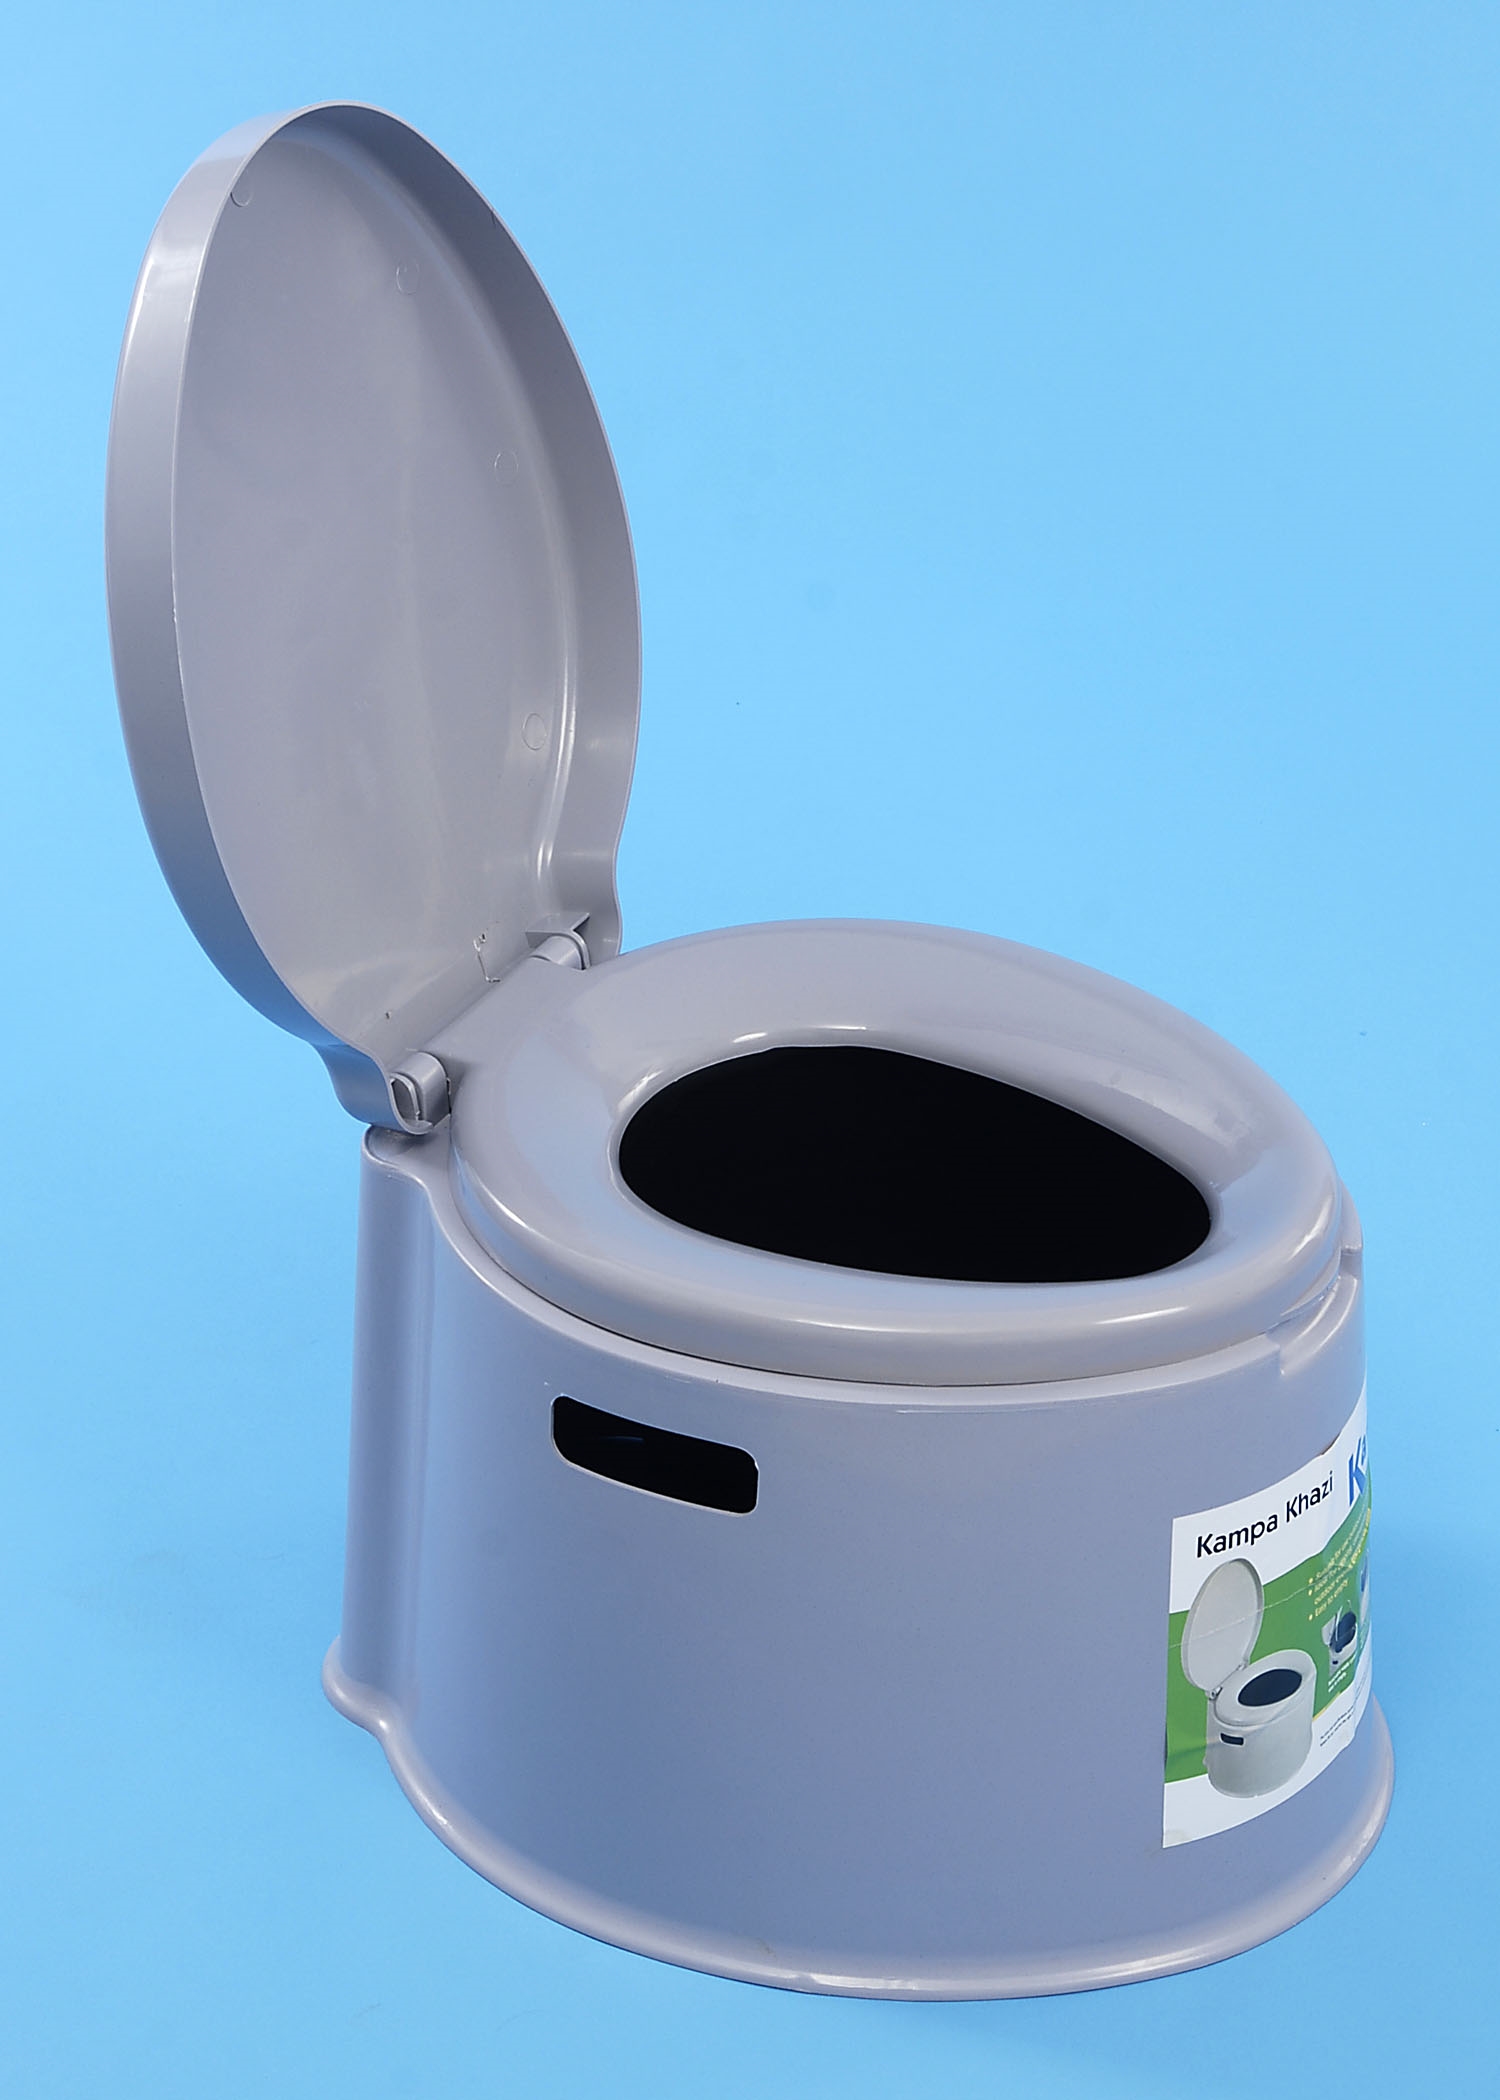 Male Female Portable Urine Pot Toilet Containers Discreet Easy To Wash Essential 